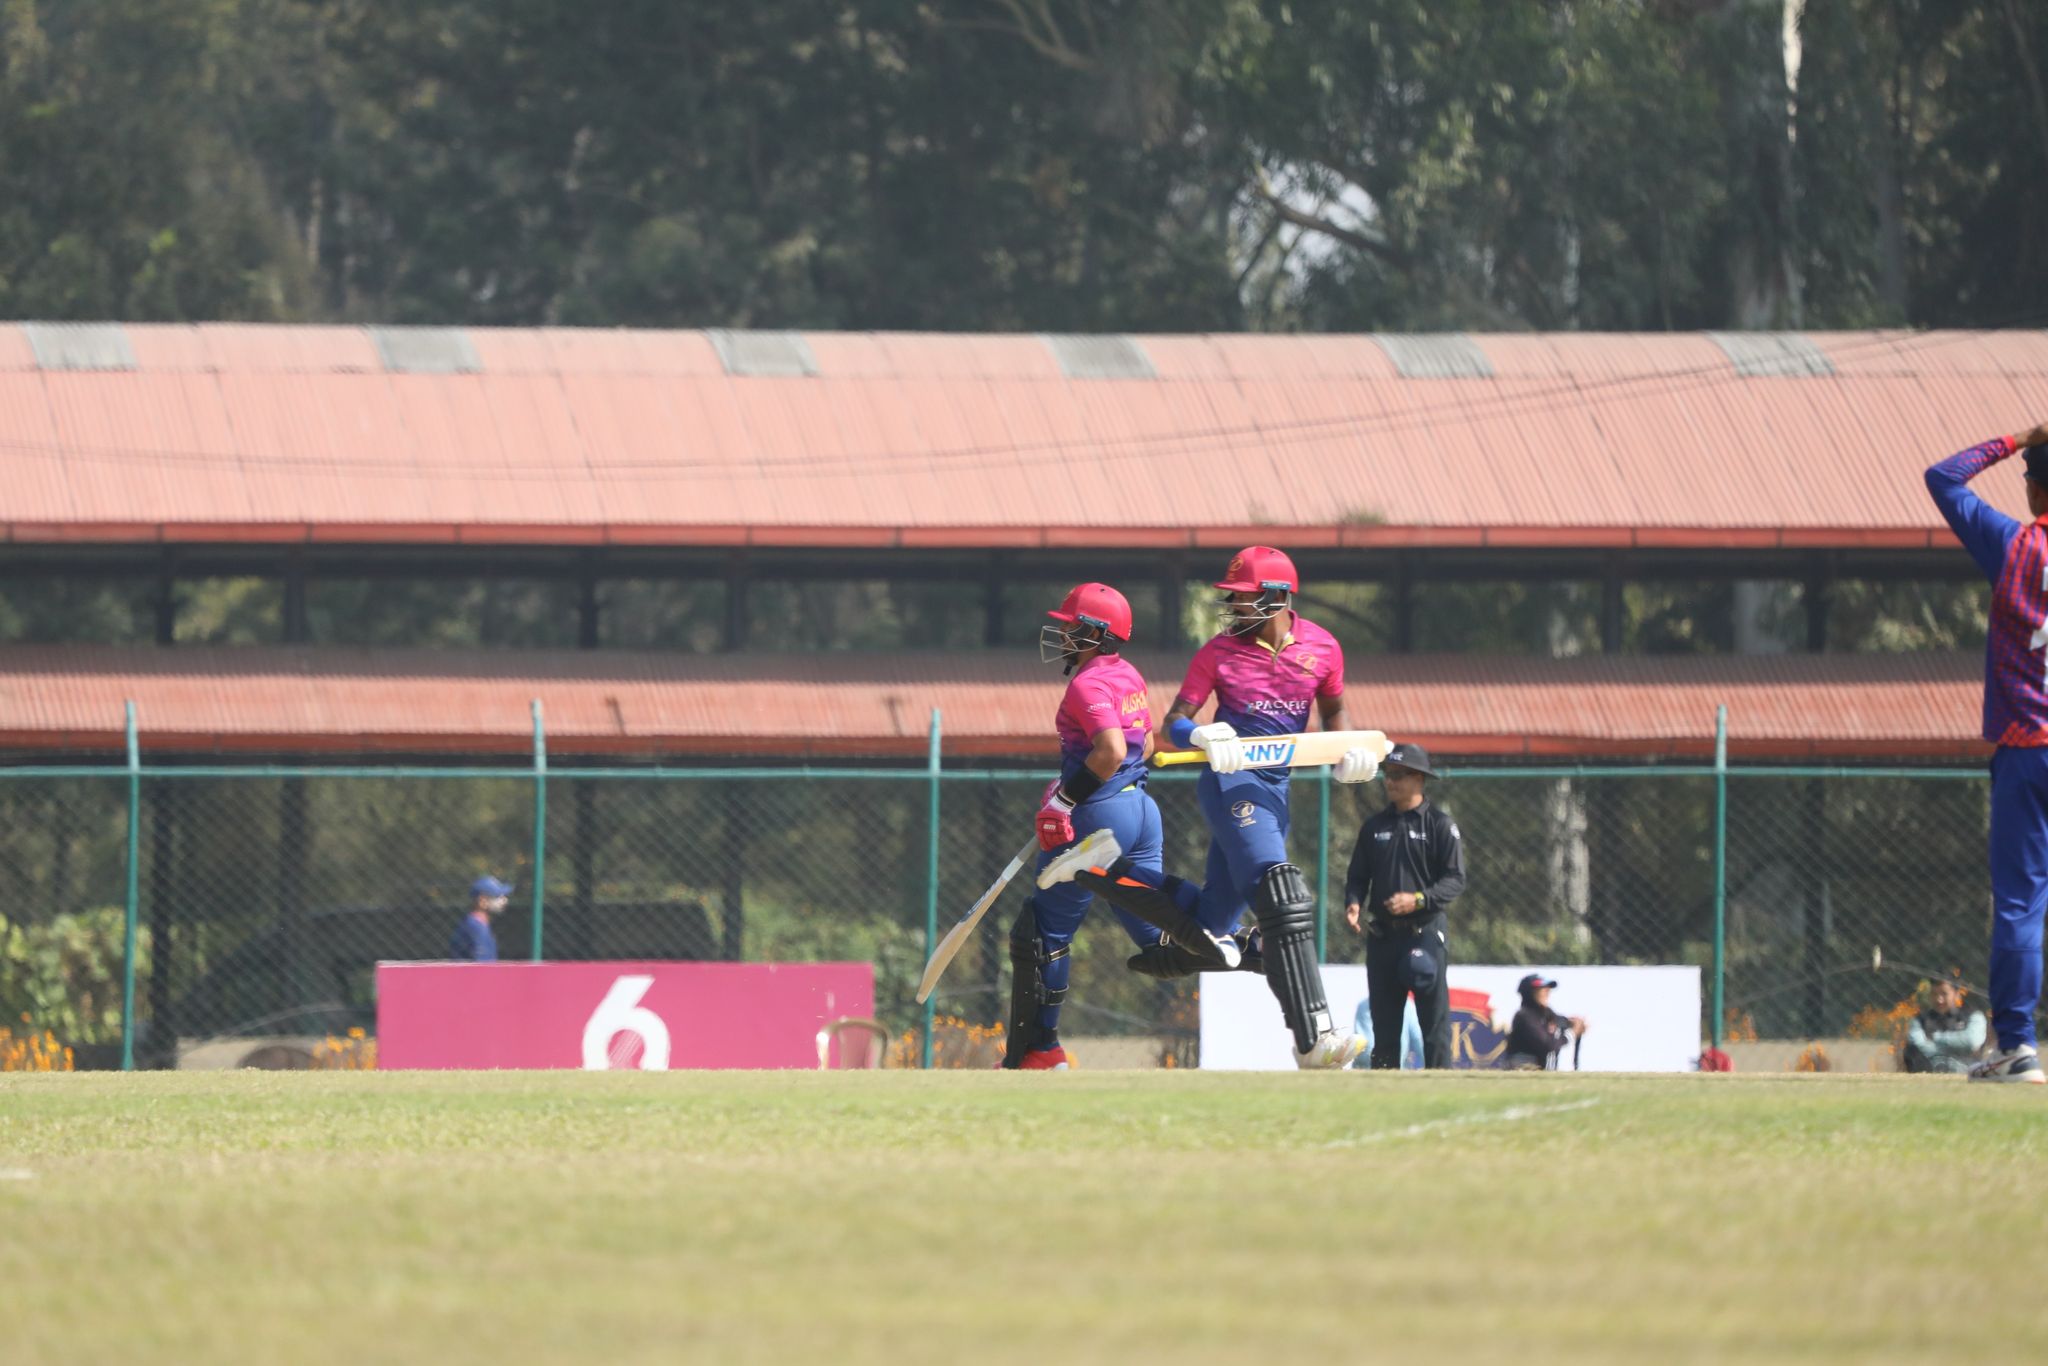 UAE gives Nepal a target of 192 runs